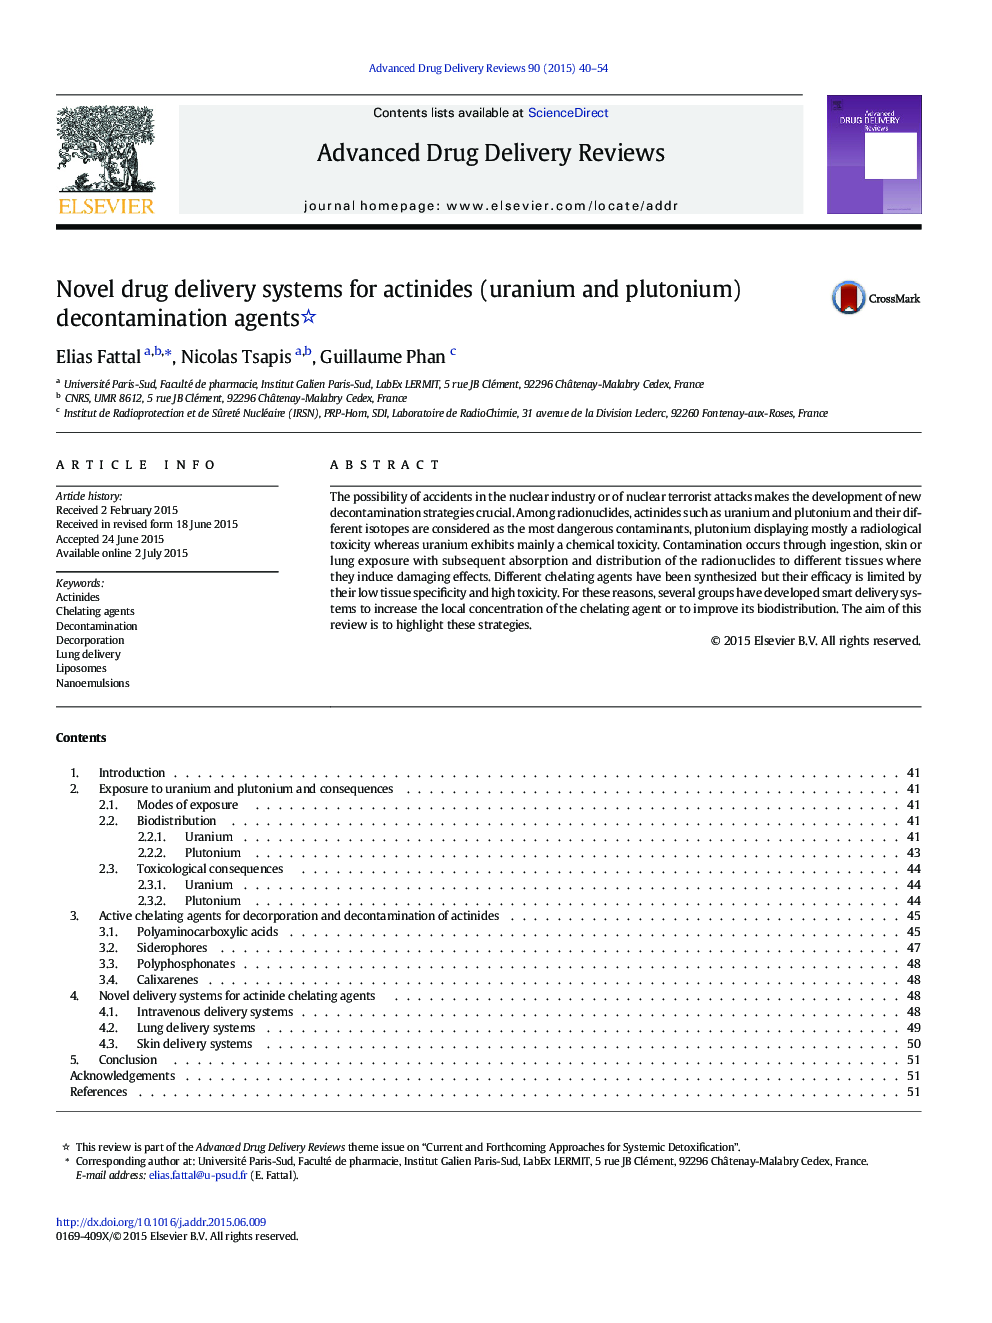 Novel drug delivery systems for actinides (uranium and plutonium) decontamination agents